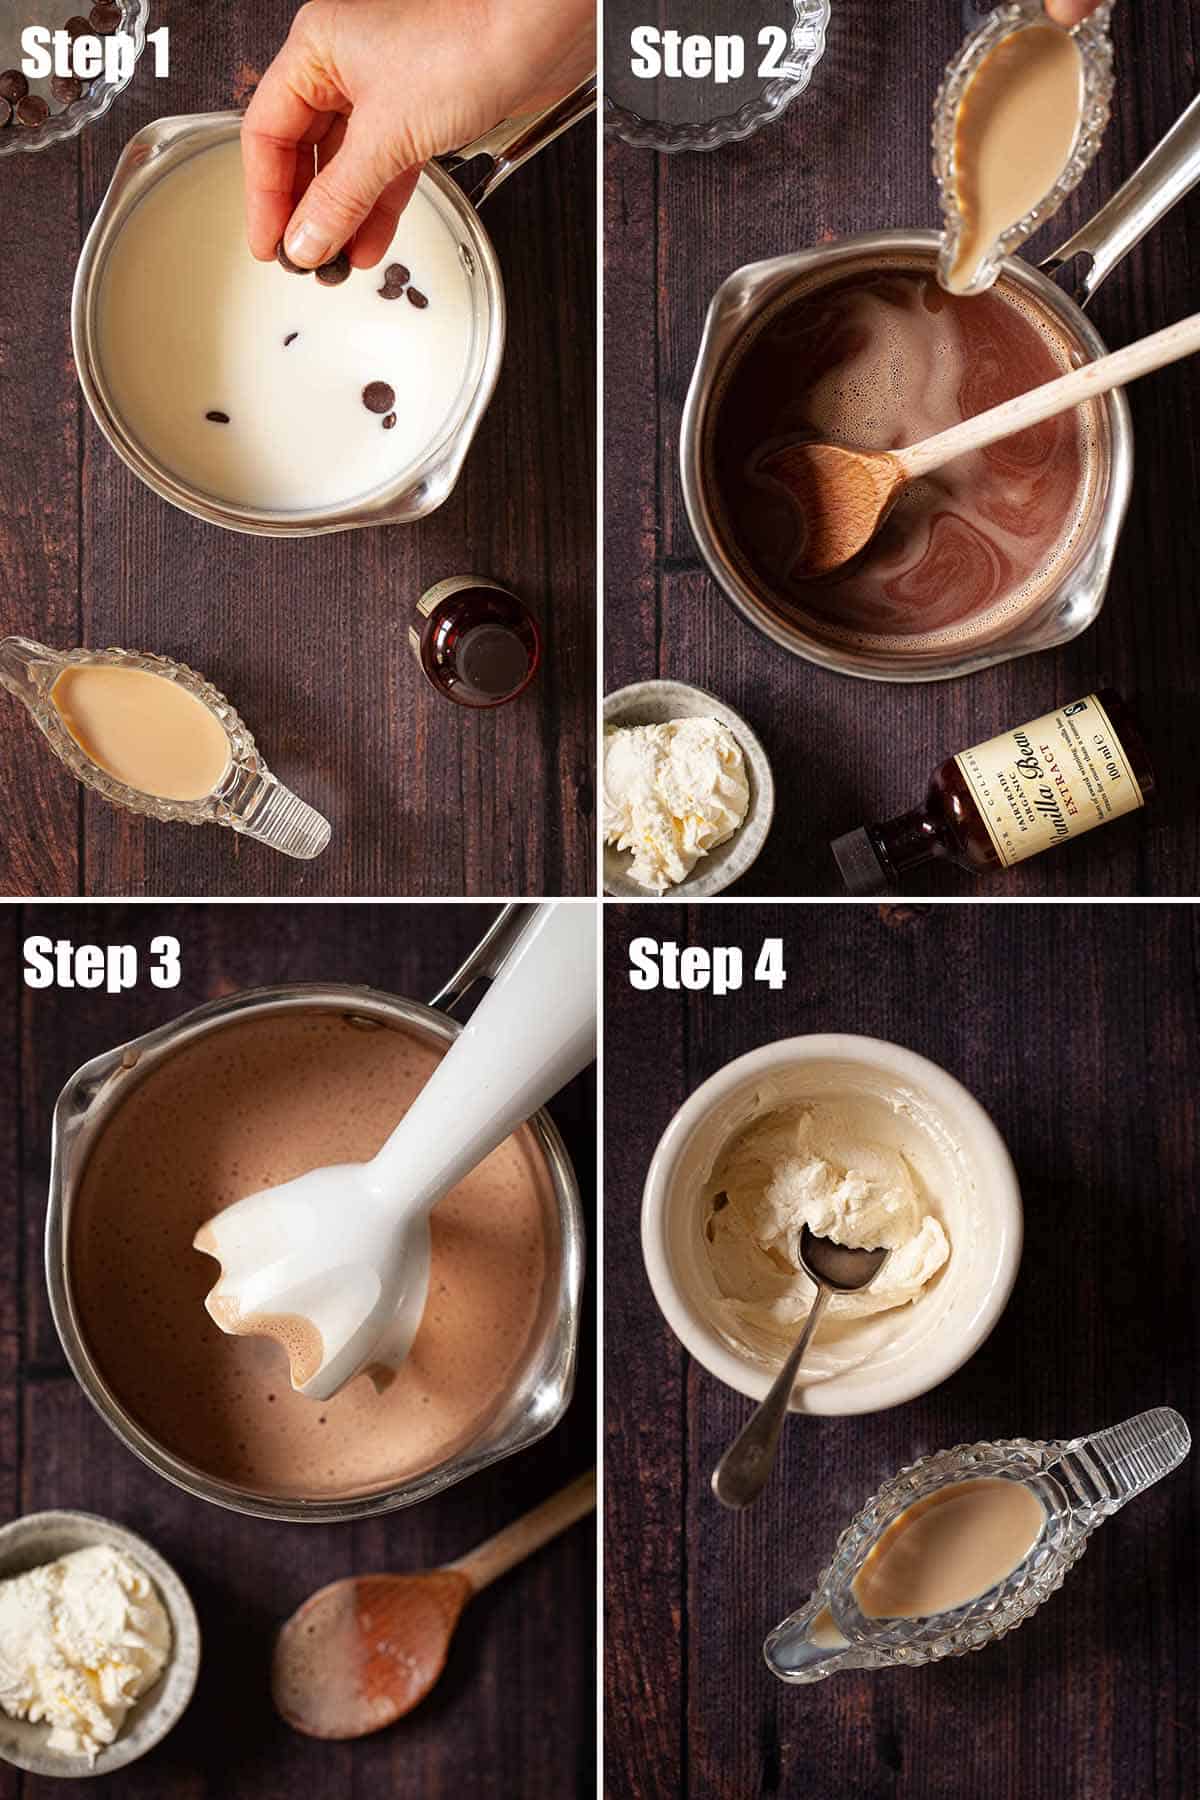 Step by step images to making a boozy chocolate drink.